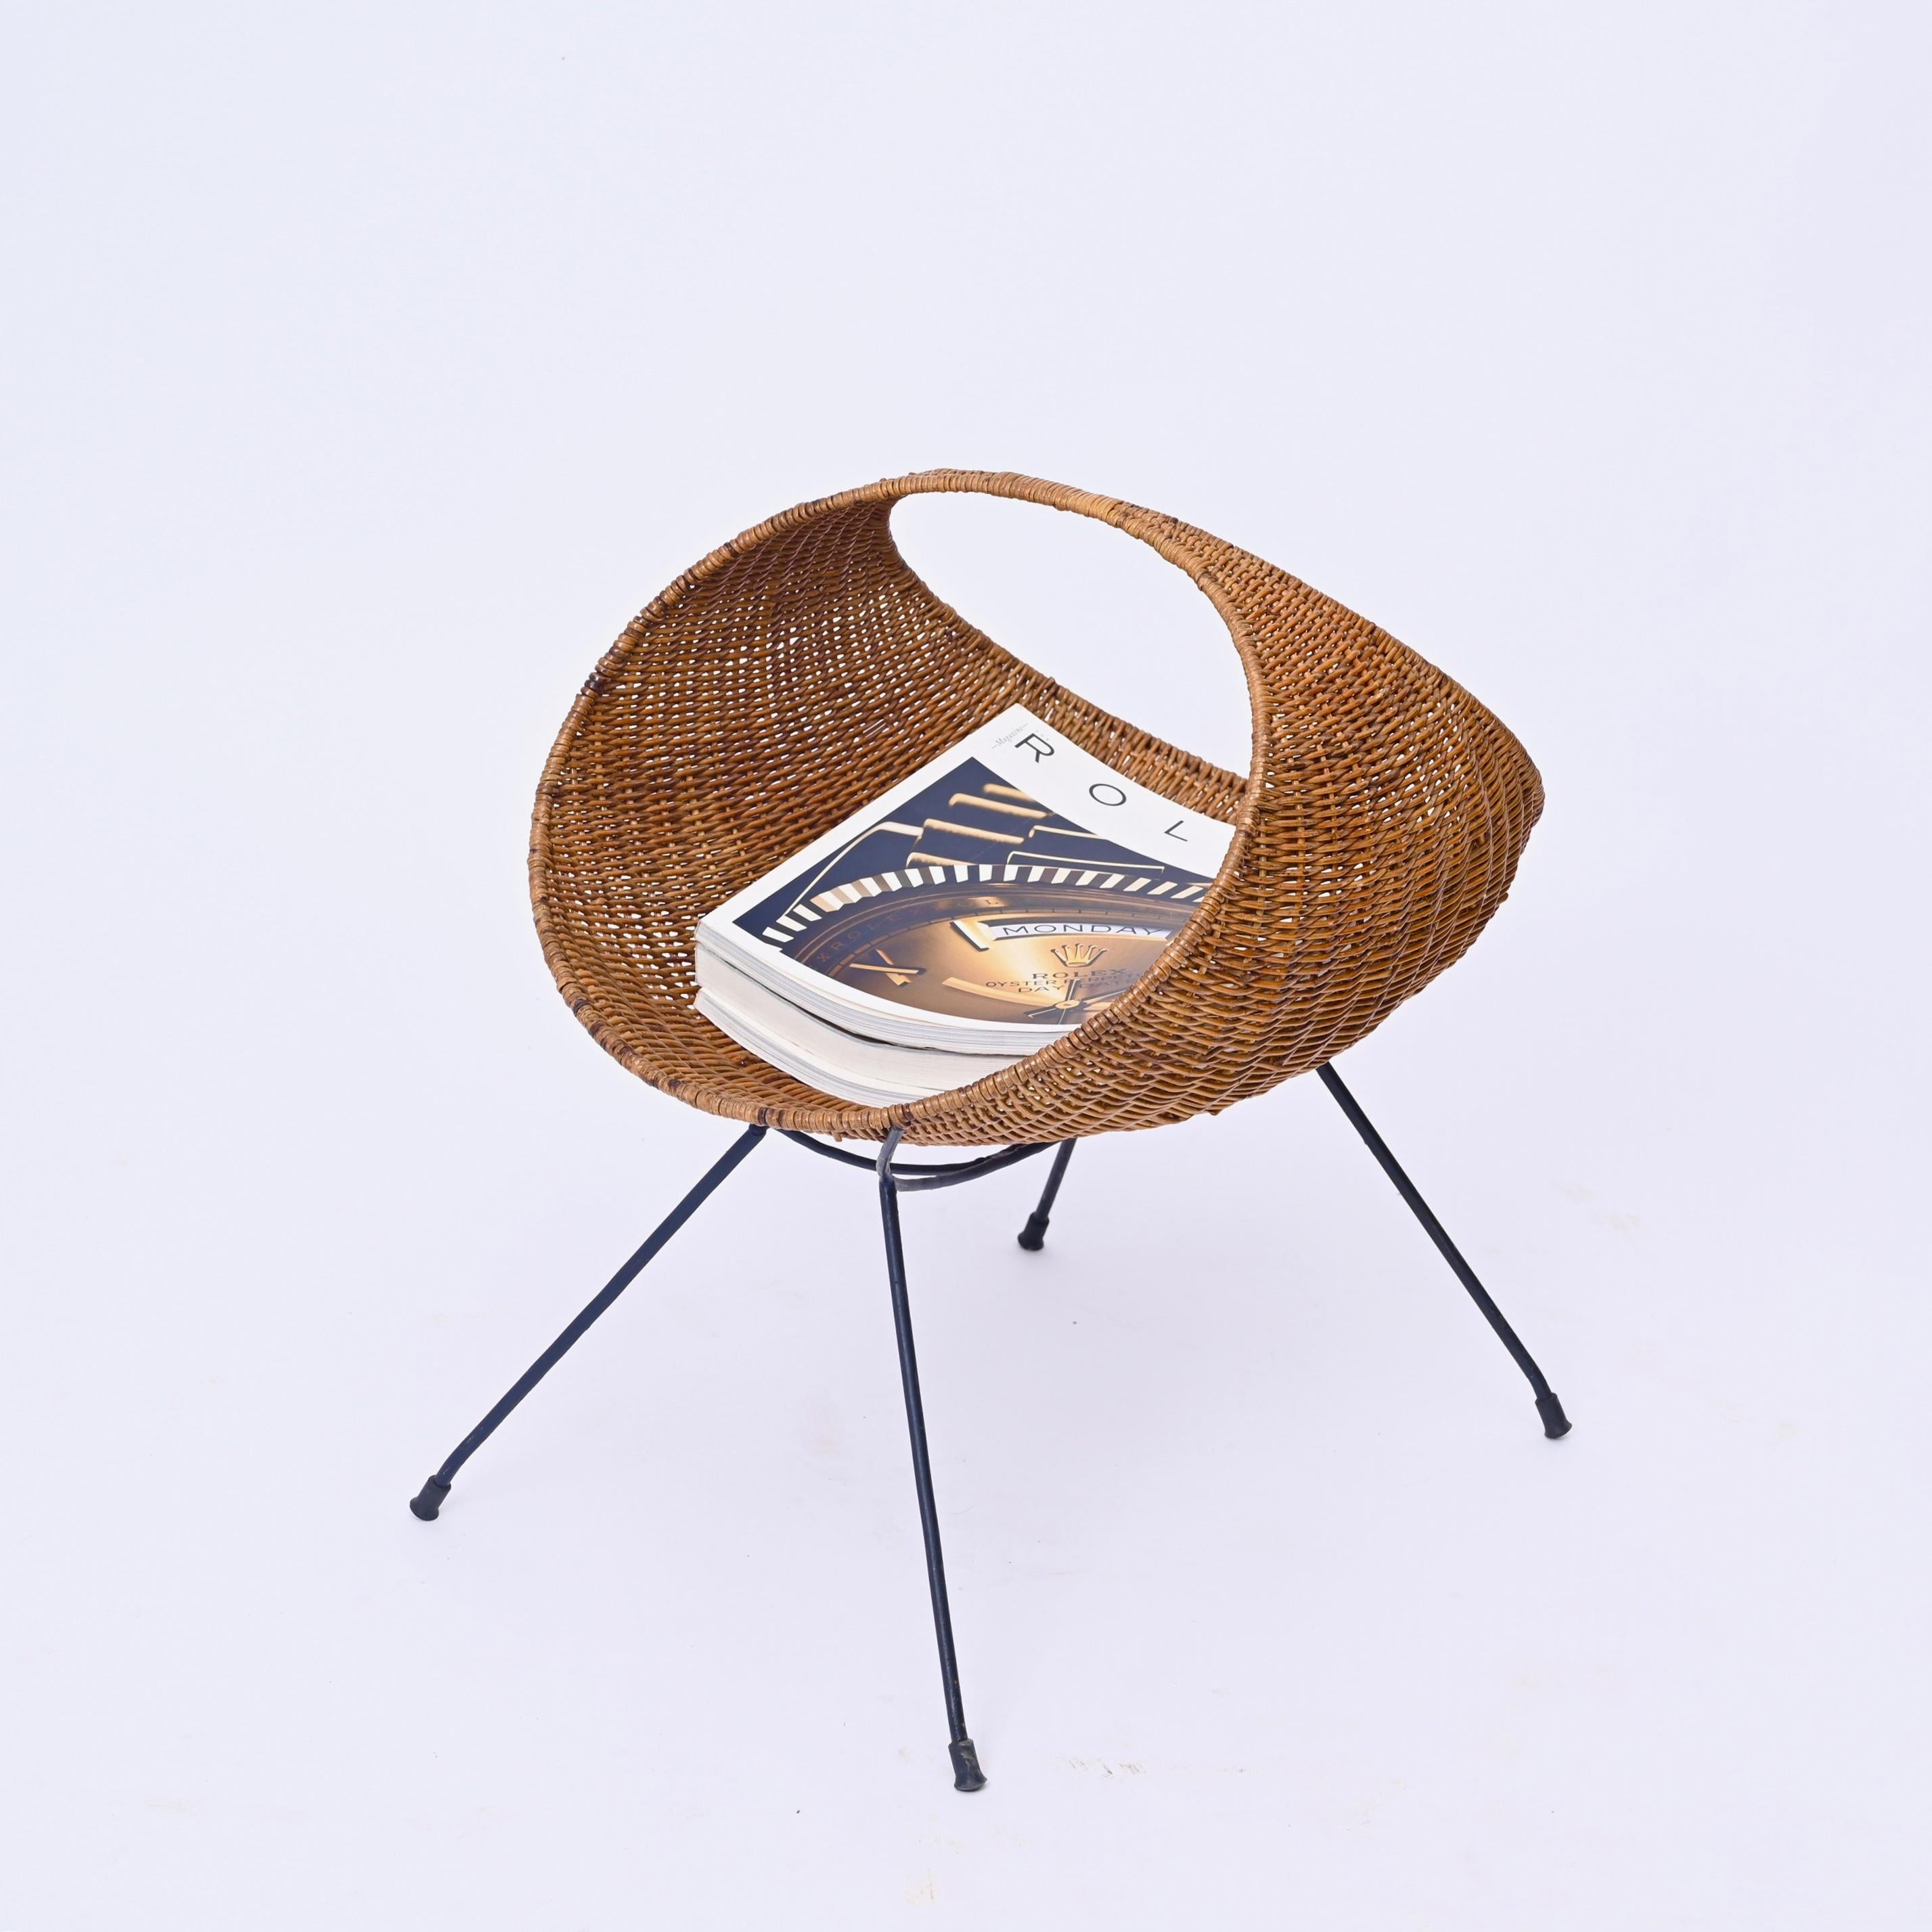 Mid-Century Modern Campo & Graffi Magazine Rack in Wicker and Black Enameled Iron, Italy 1950s For Sale